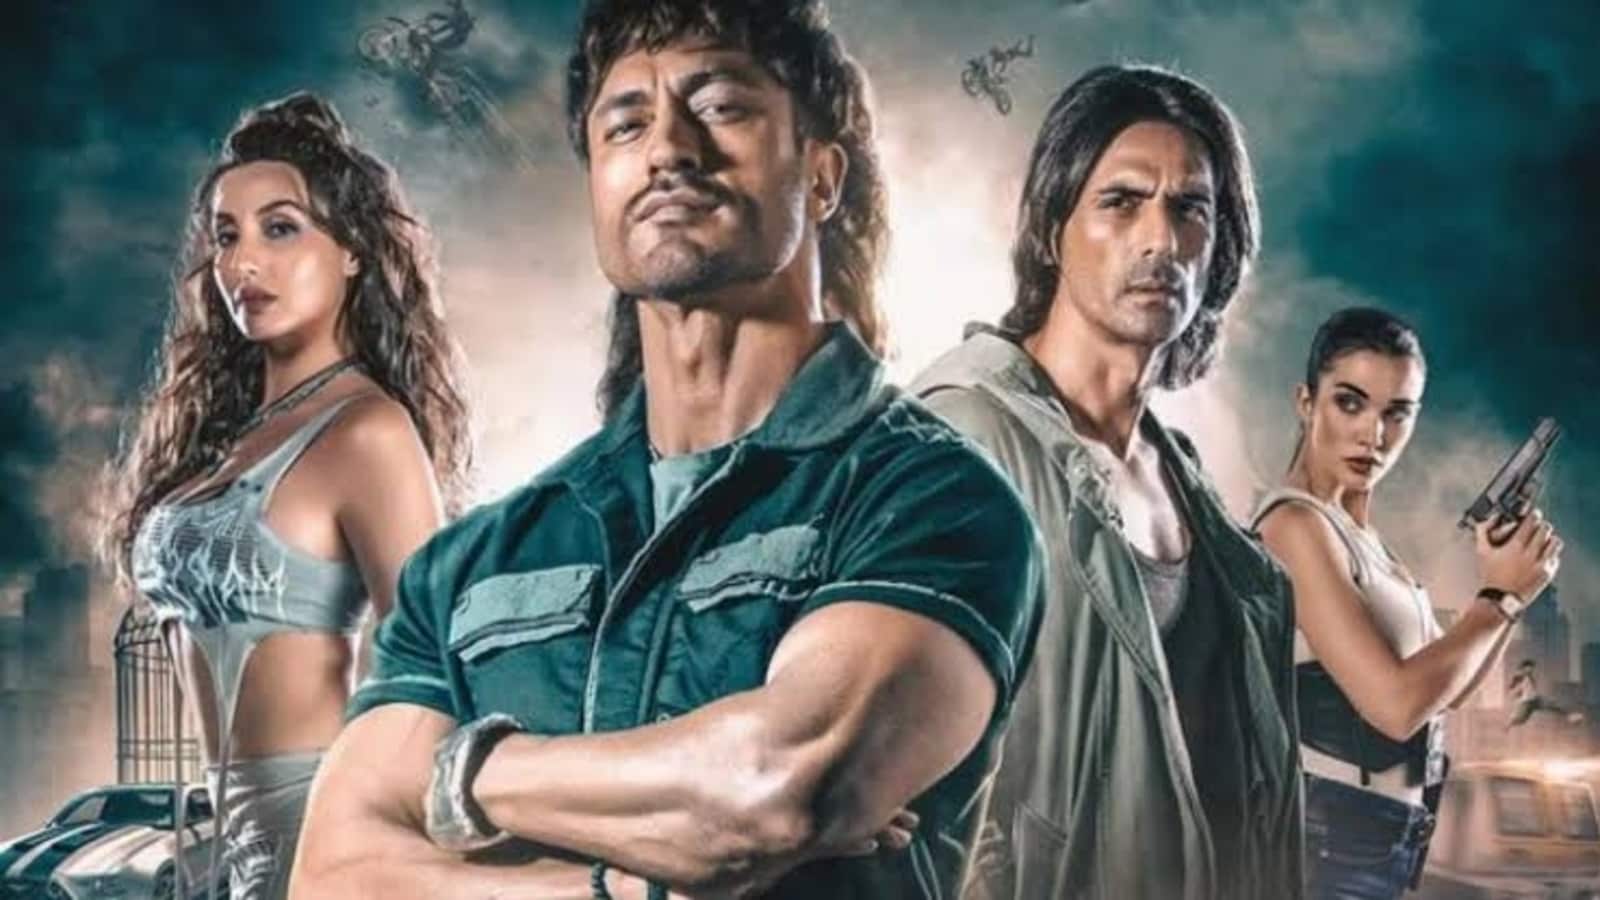 Crakk Film Review: Vidyut Jammwal and Arjun Rampal's Action-packed Thriller Delivers Mindless Entertainment